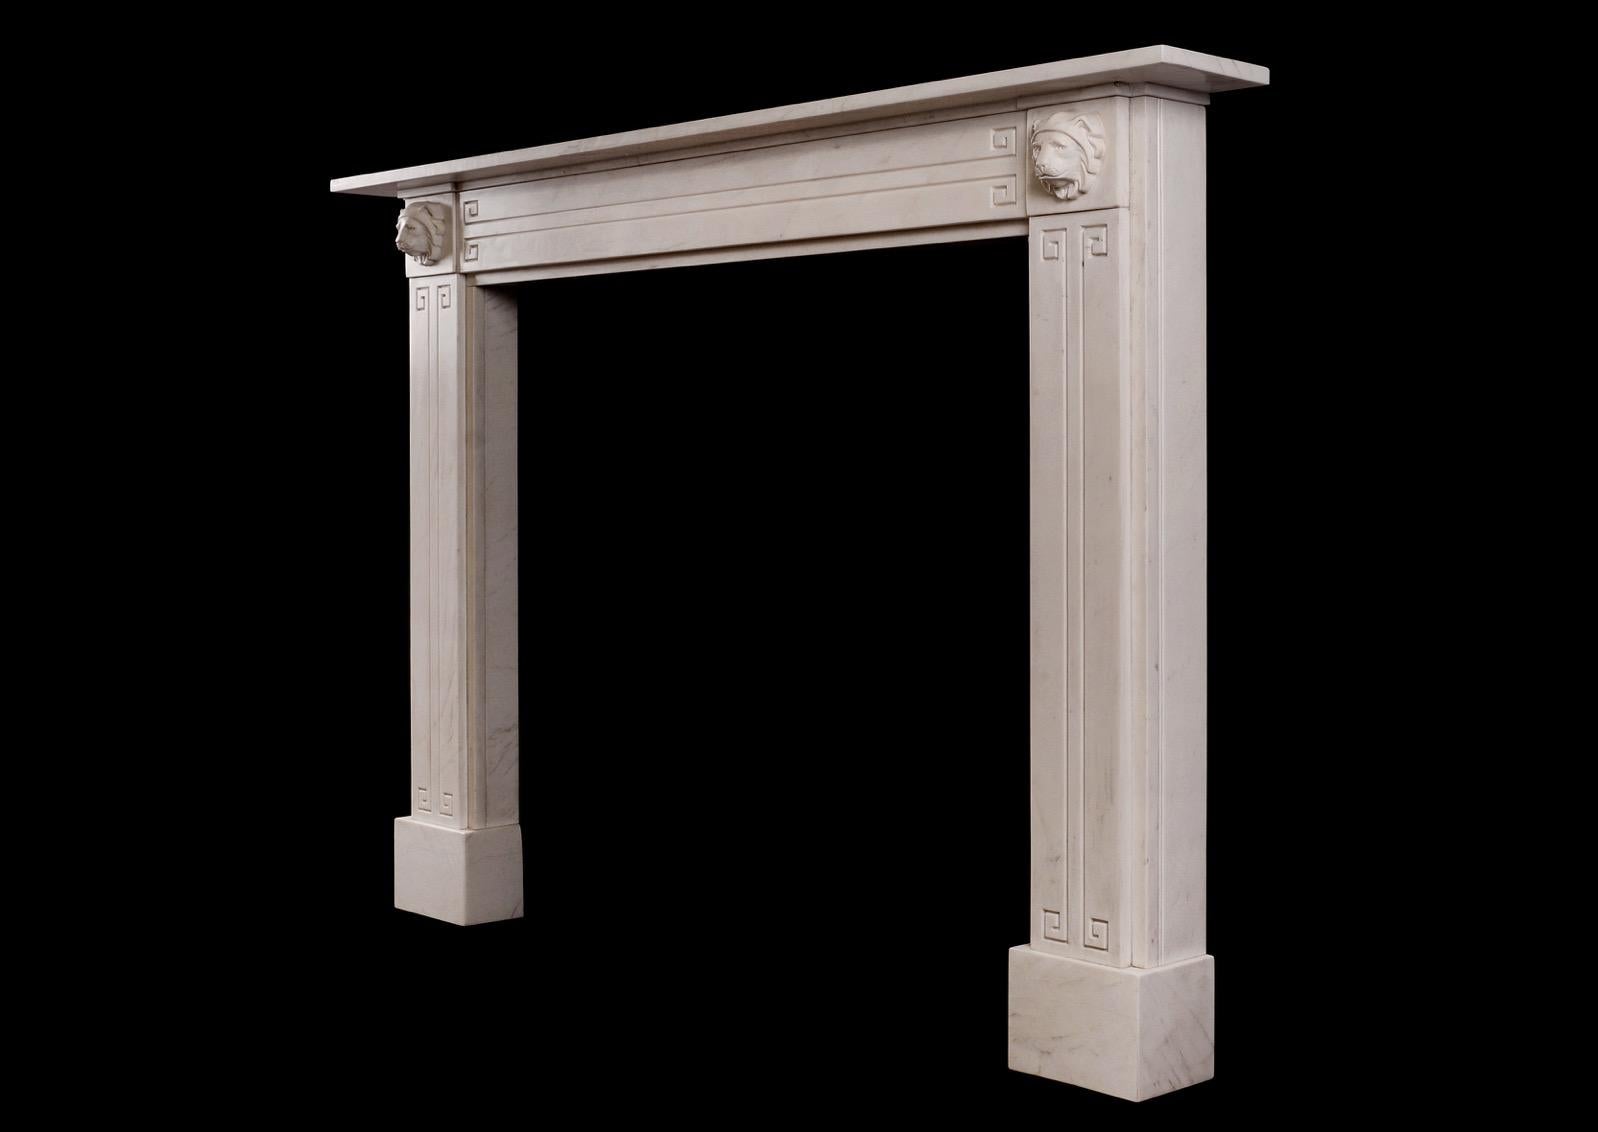 An attractive English Regency fireplace in white marble. The jambs and frieze with Greek key motif, the end blockings with carved lion's masks with moulded shelf above. A fine quality copy of a period original. N.B. May be subject to an extended